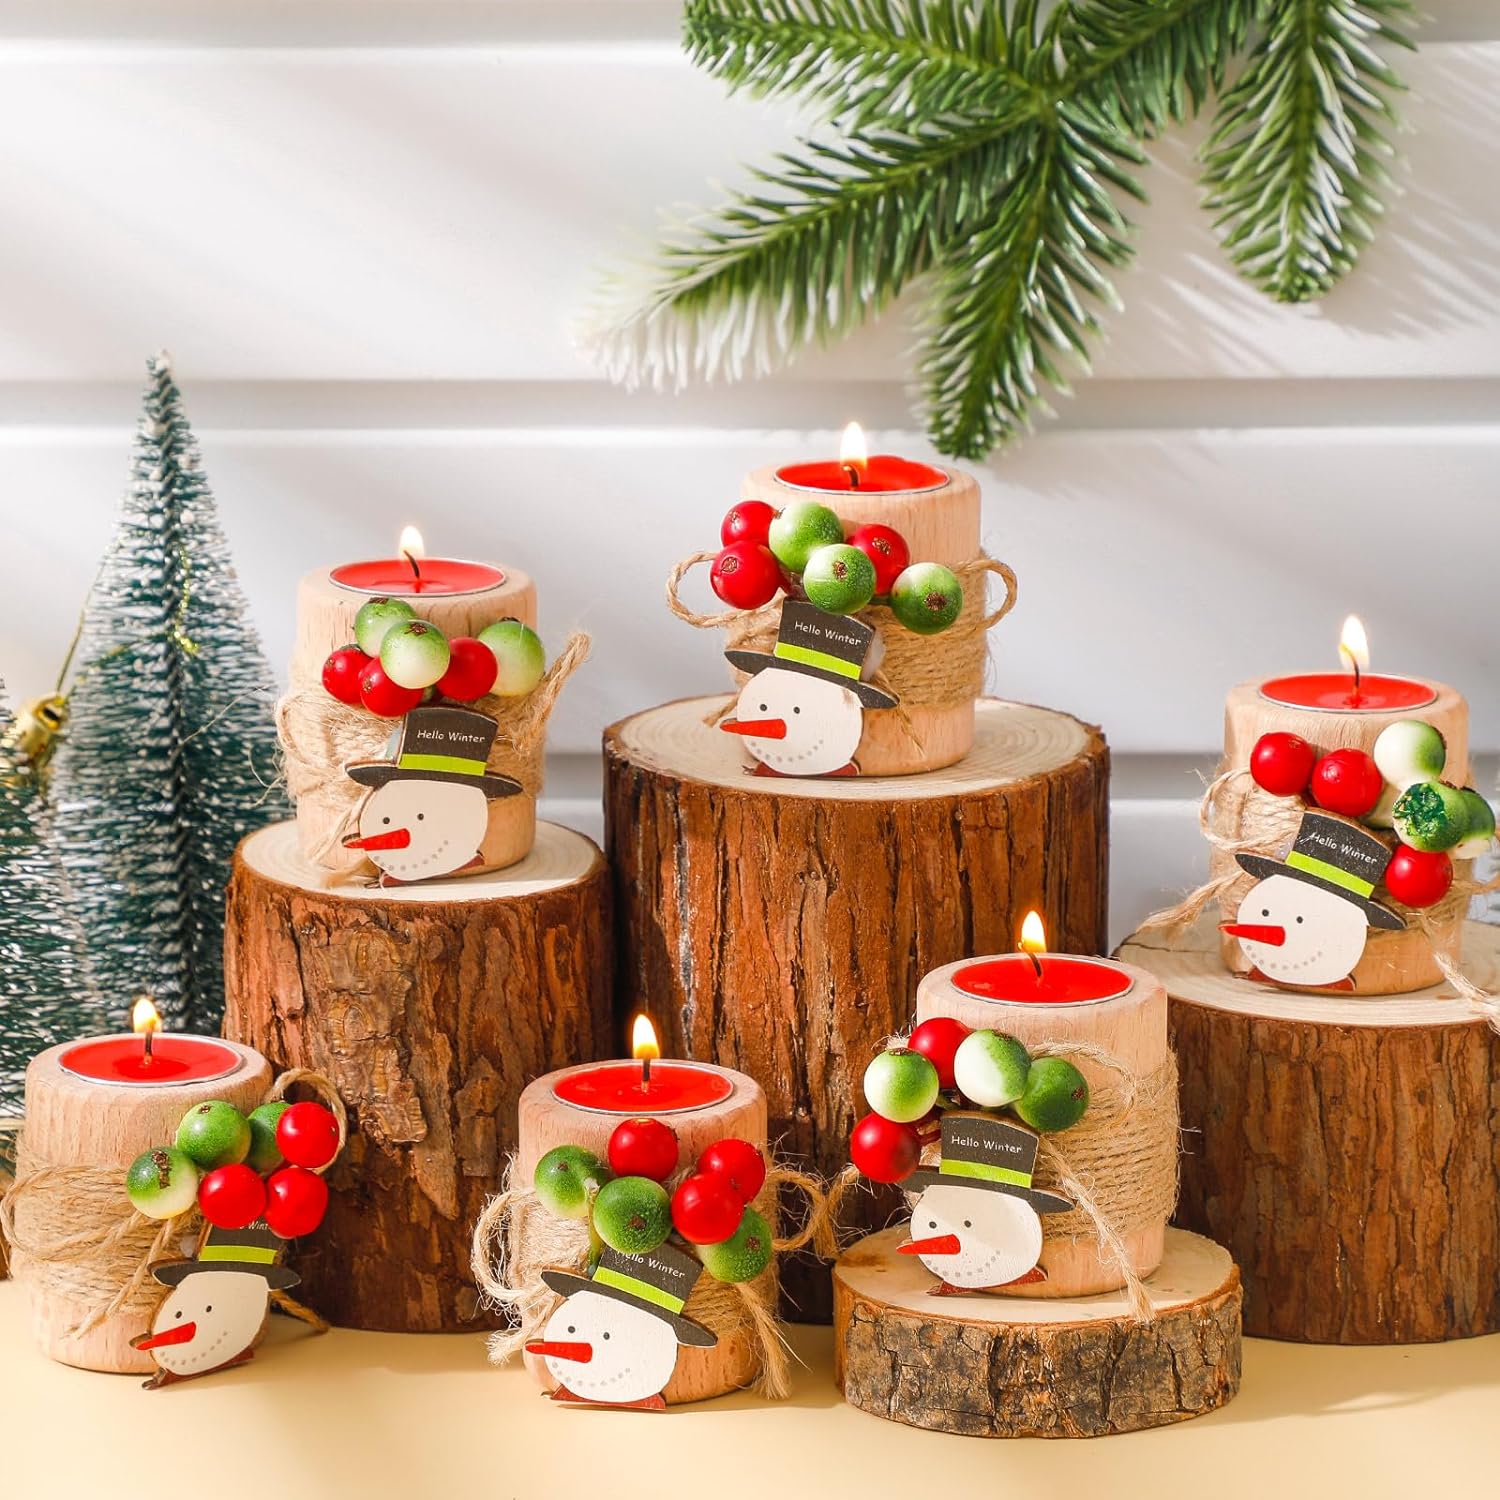 20 Pcs Christmas Wood Candle Holders Wooden Cylinder Votive Candle Holders Tealight Candle Holder with Tea Lights Candles and Tag for Xmas Table Centerpiece Decor Thank You Gifts(Snowman Style)